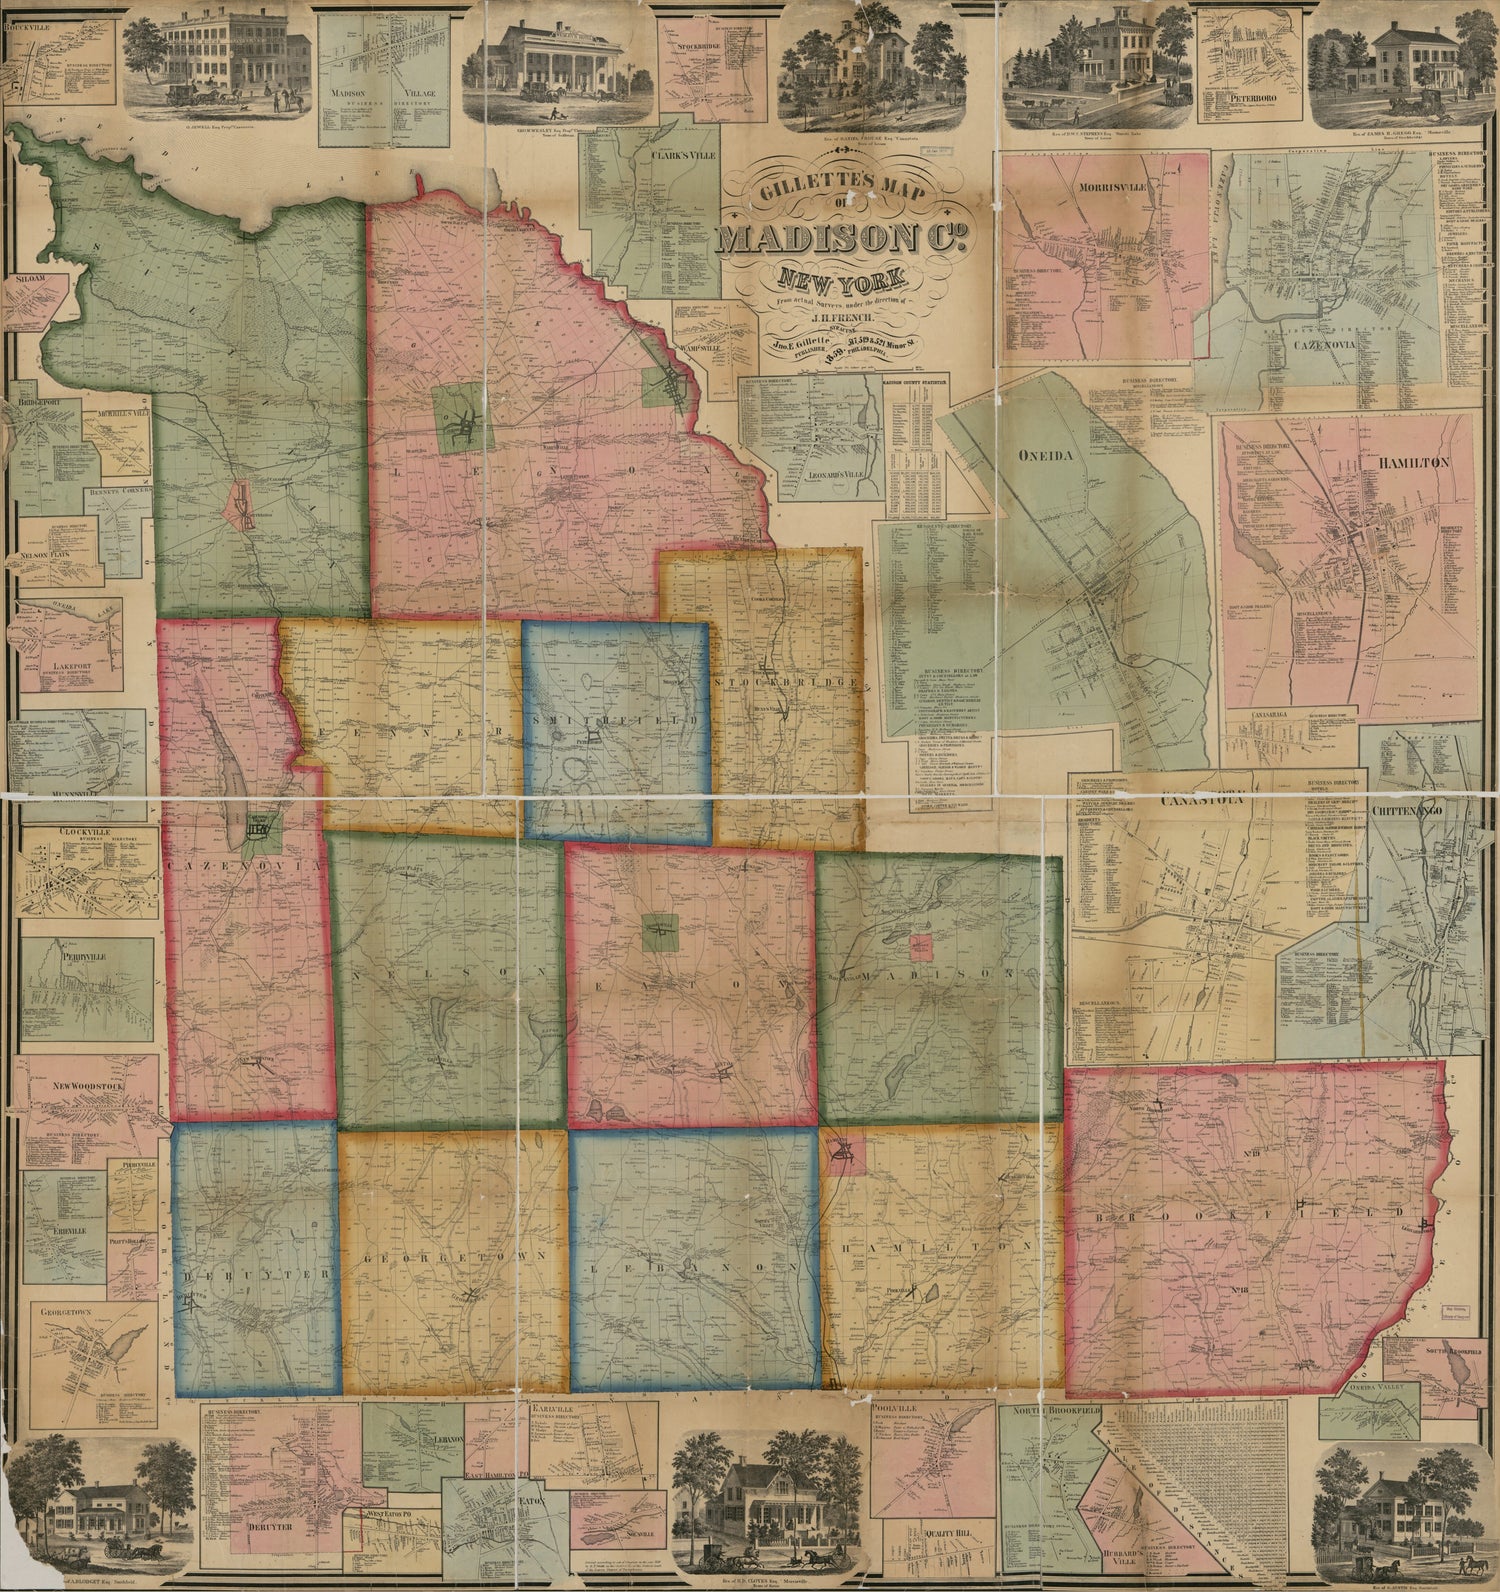 This old map of Gillette&